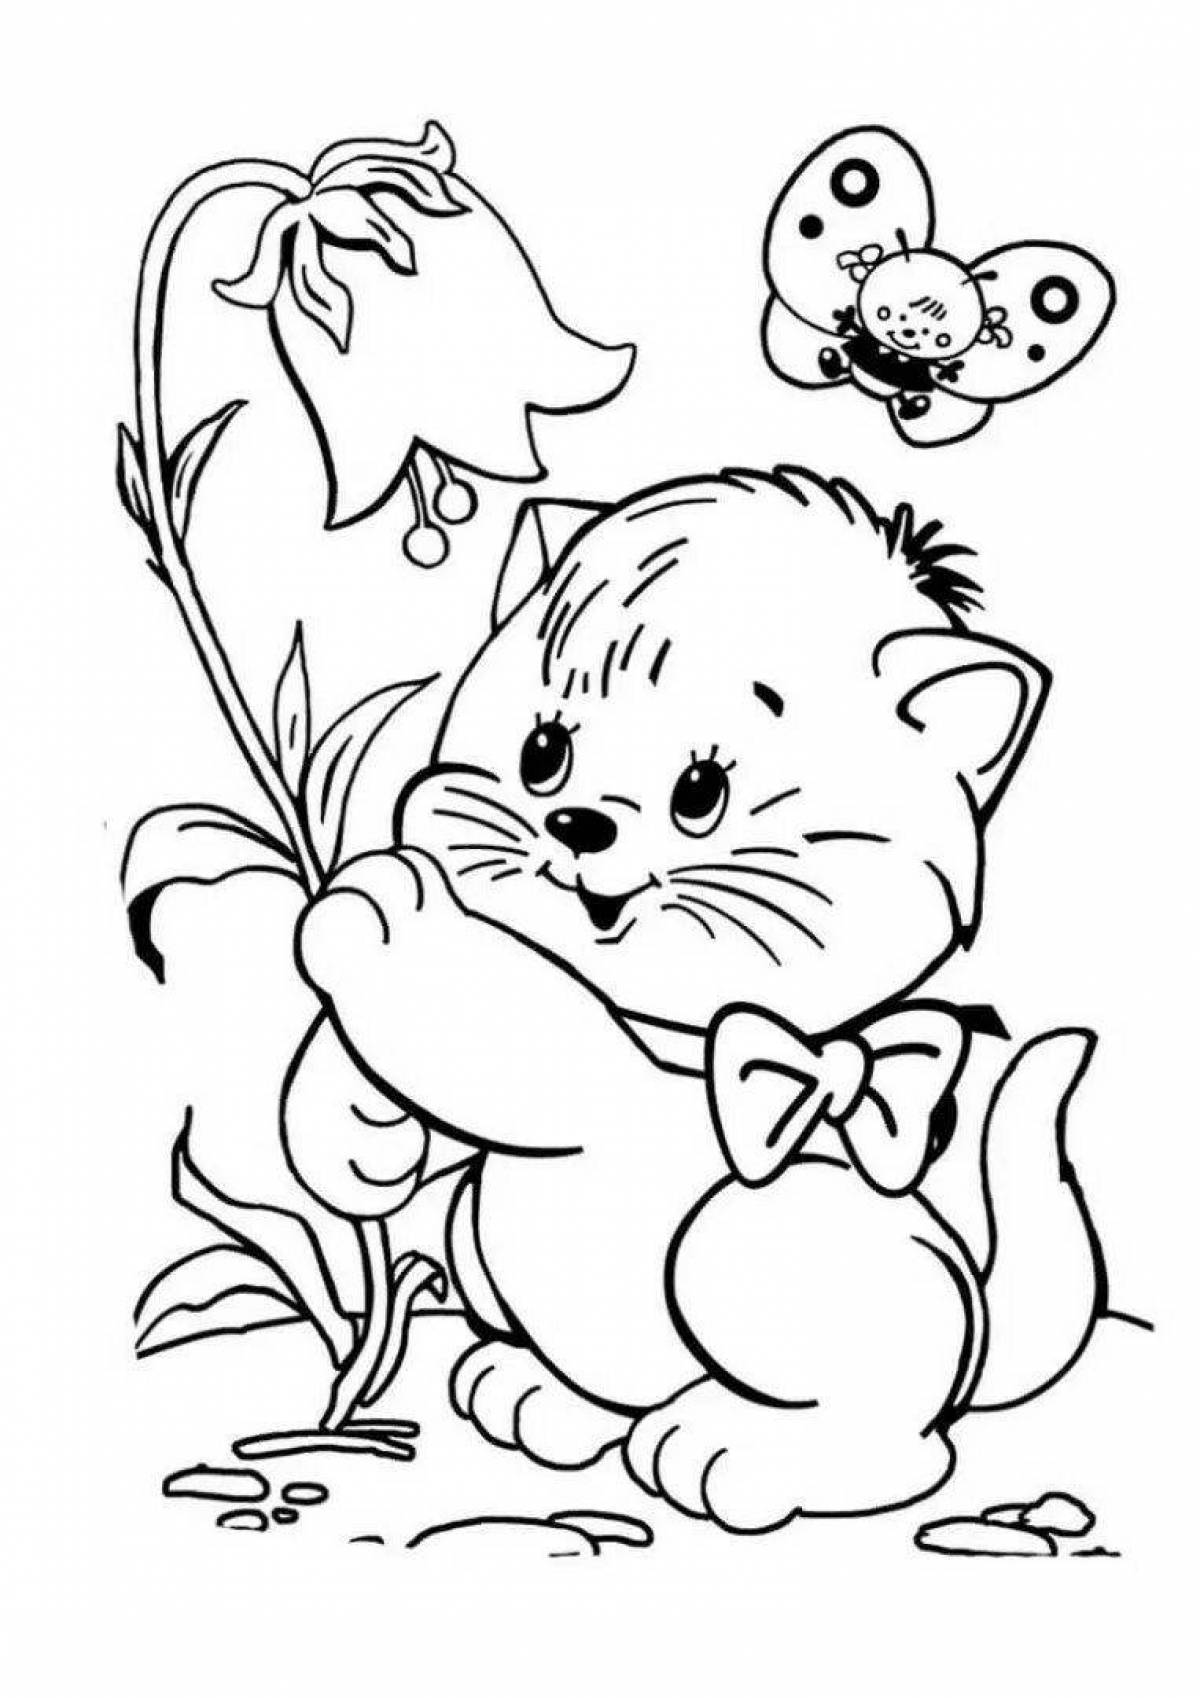 Coloring book frolicking kitten for children 5-6 years old